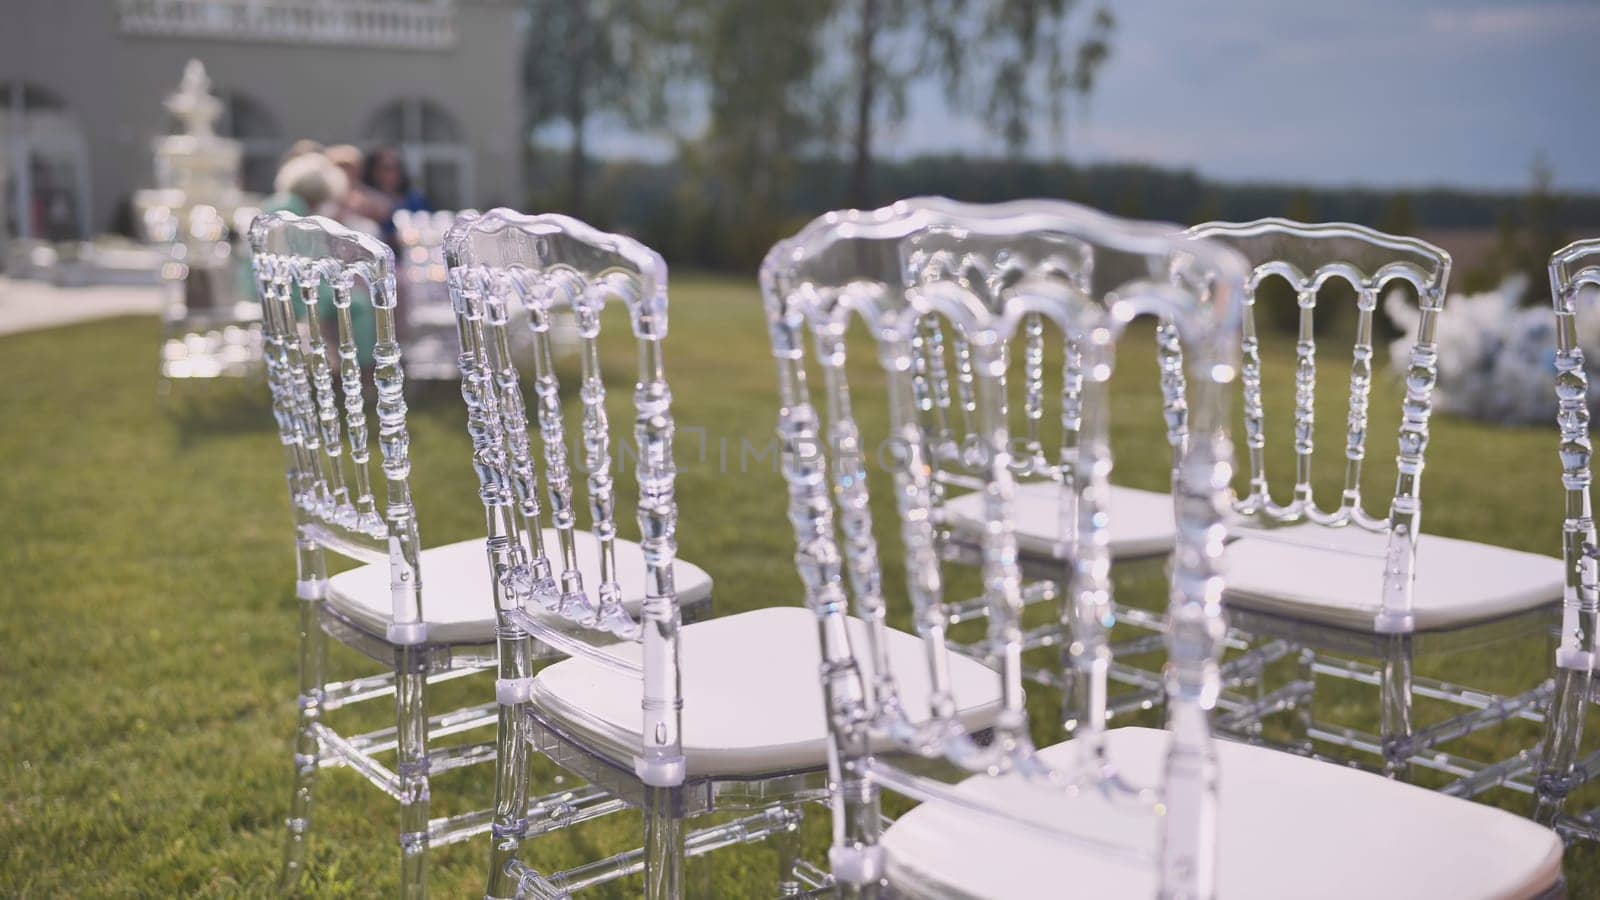 Chairs at the offsite wedding ceremony. by DovidPro